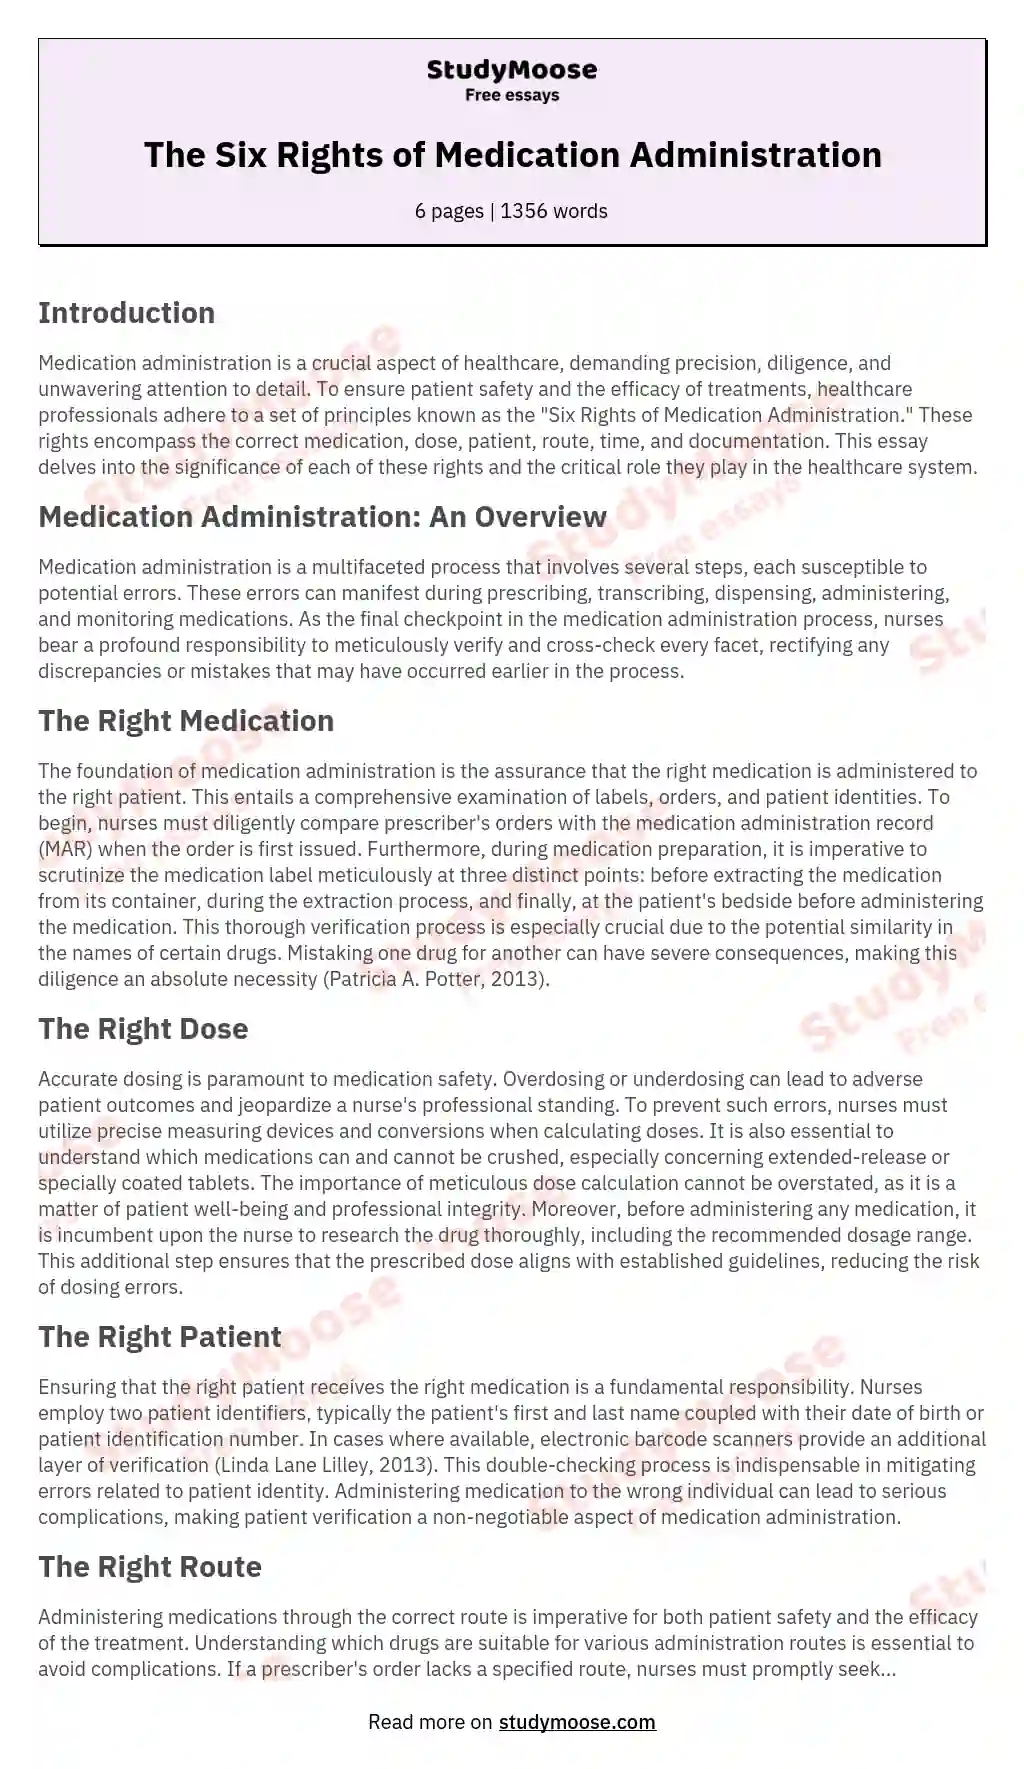 The Six Rights of Medication Administration essay